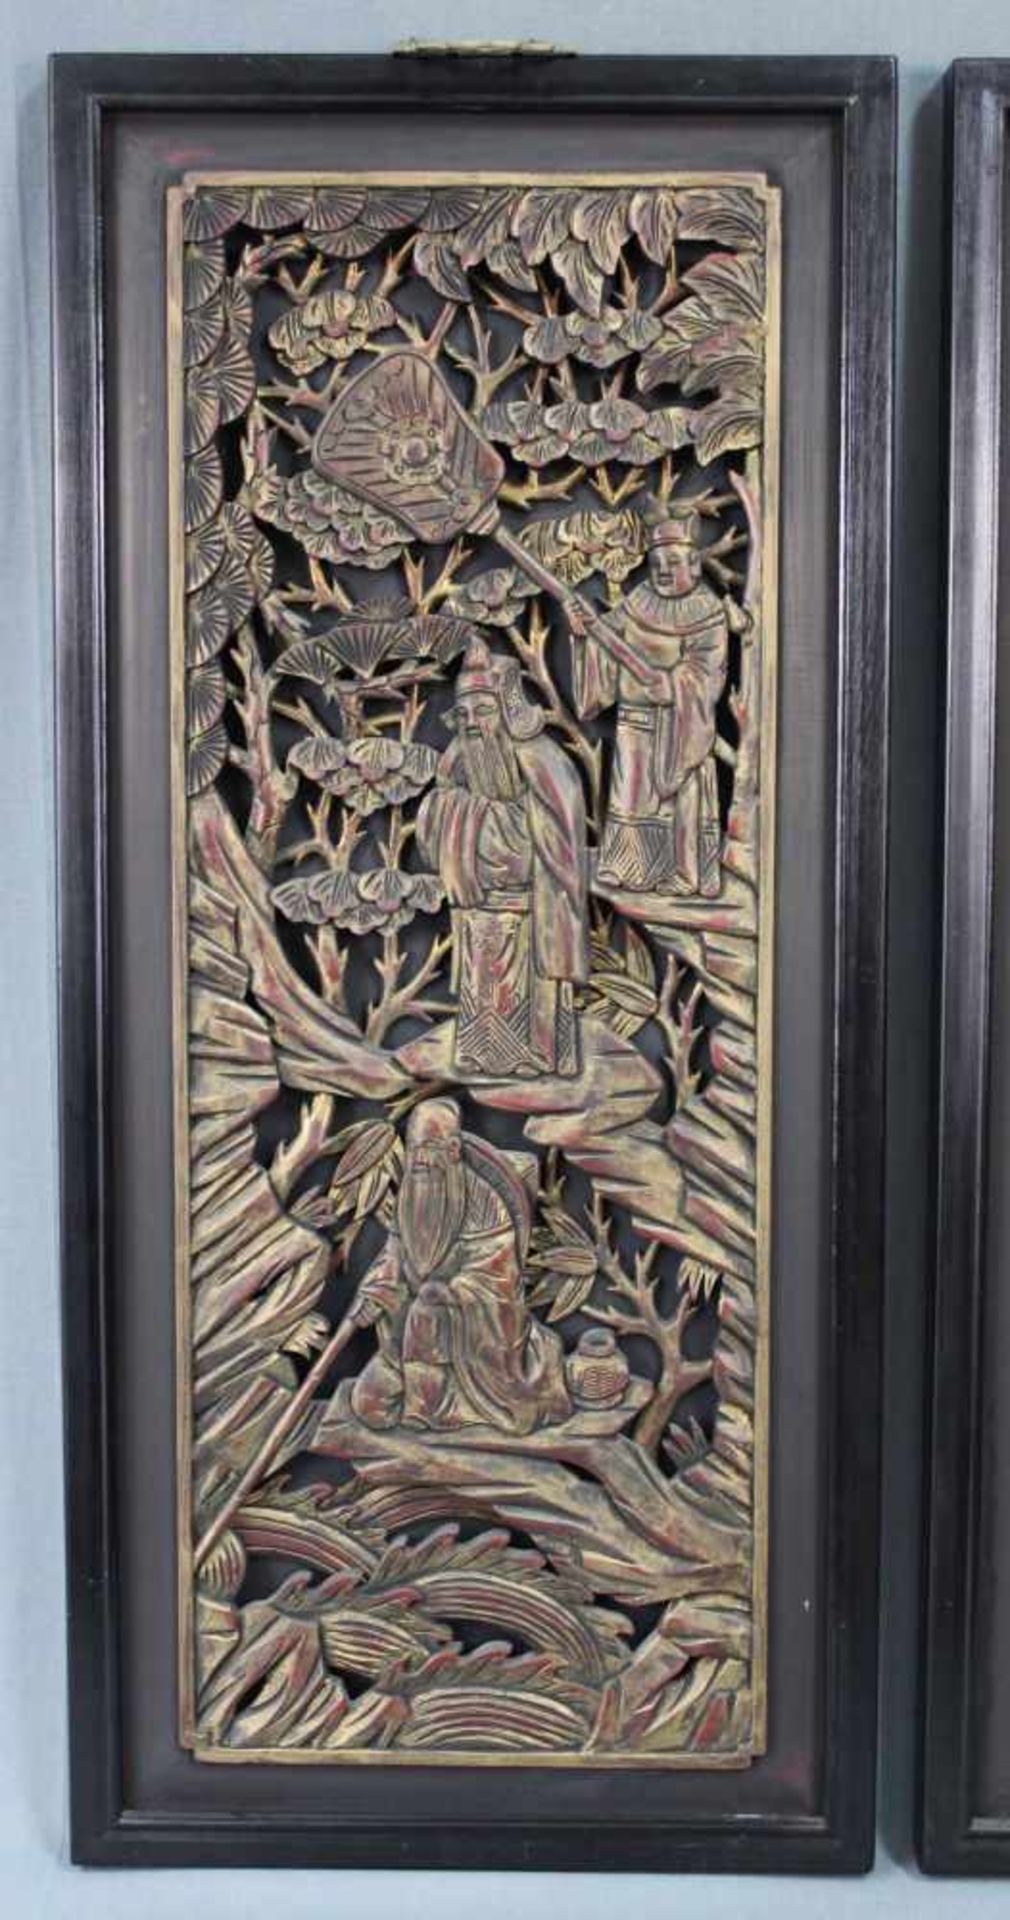 2 Paneele Holz geschnitzt. Wohl China alt. Je 77 cm x 34 cm. 2 panels carved wood. Probably China - Image 2 of 7